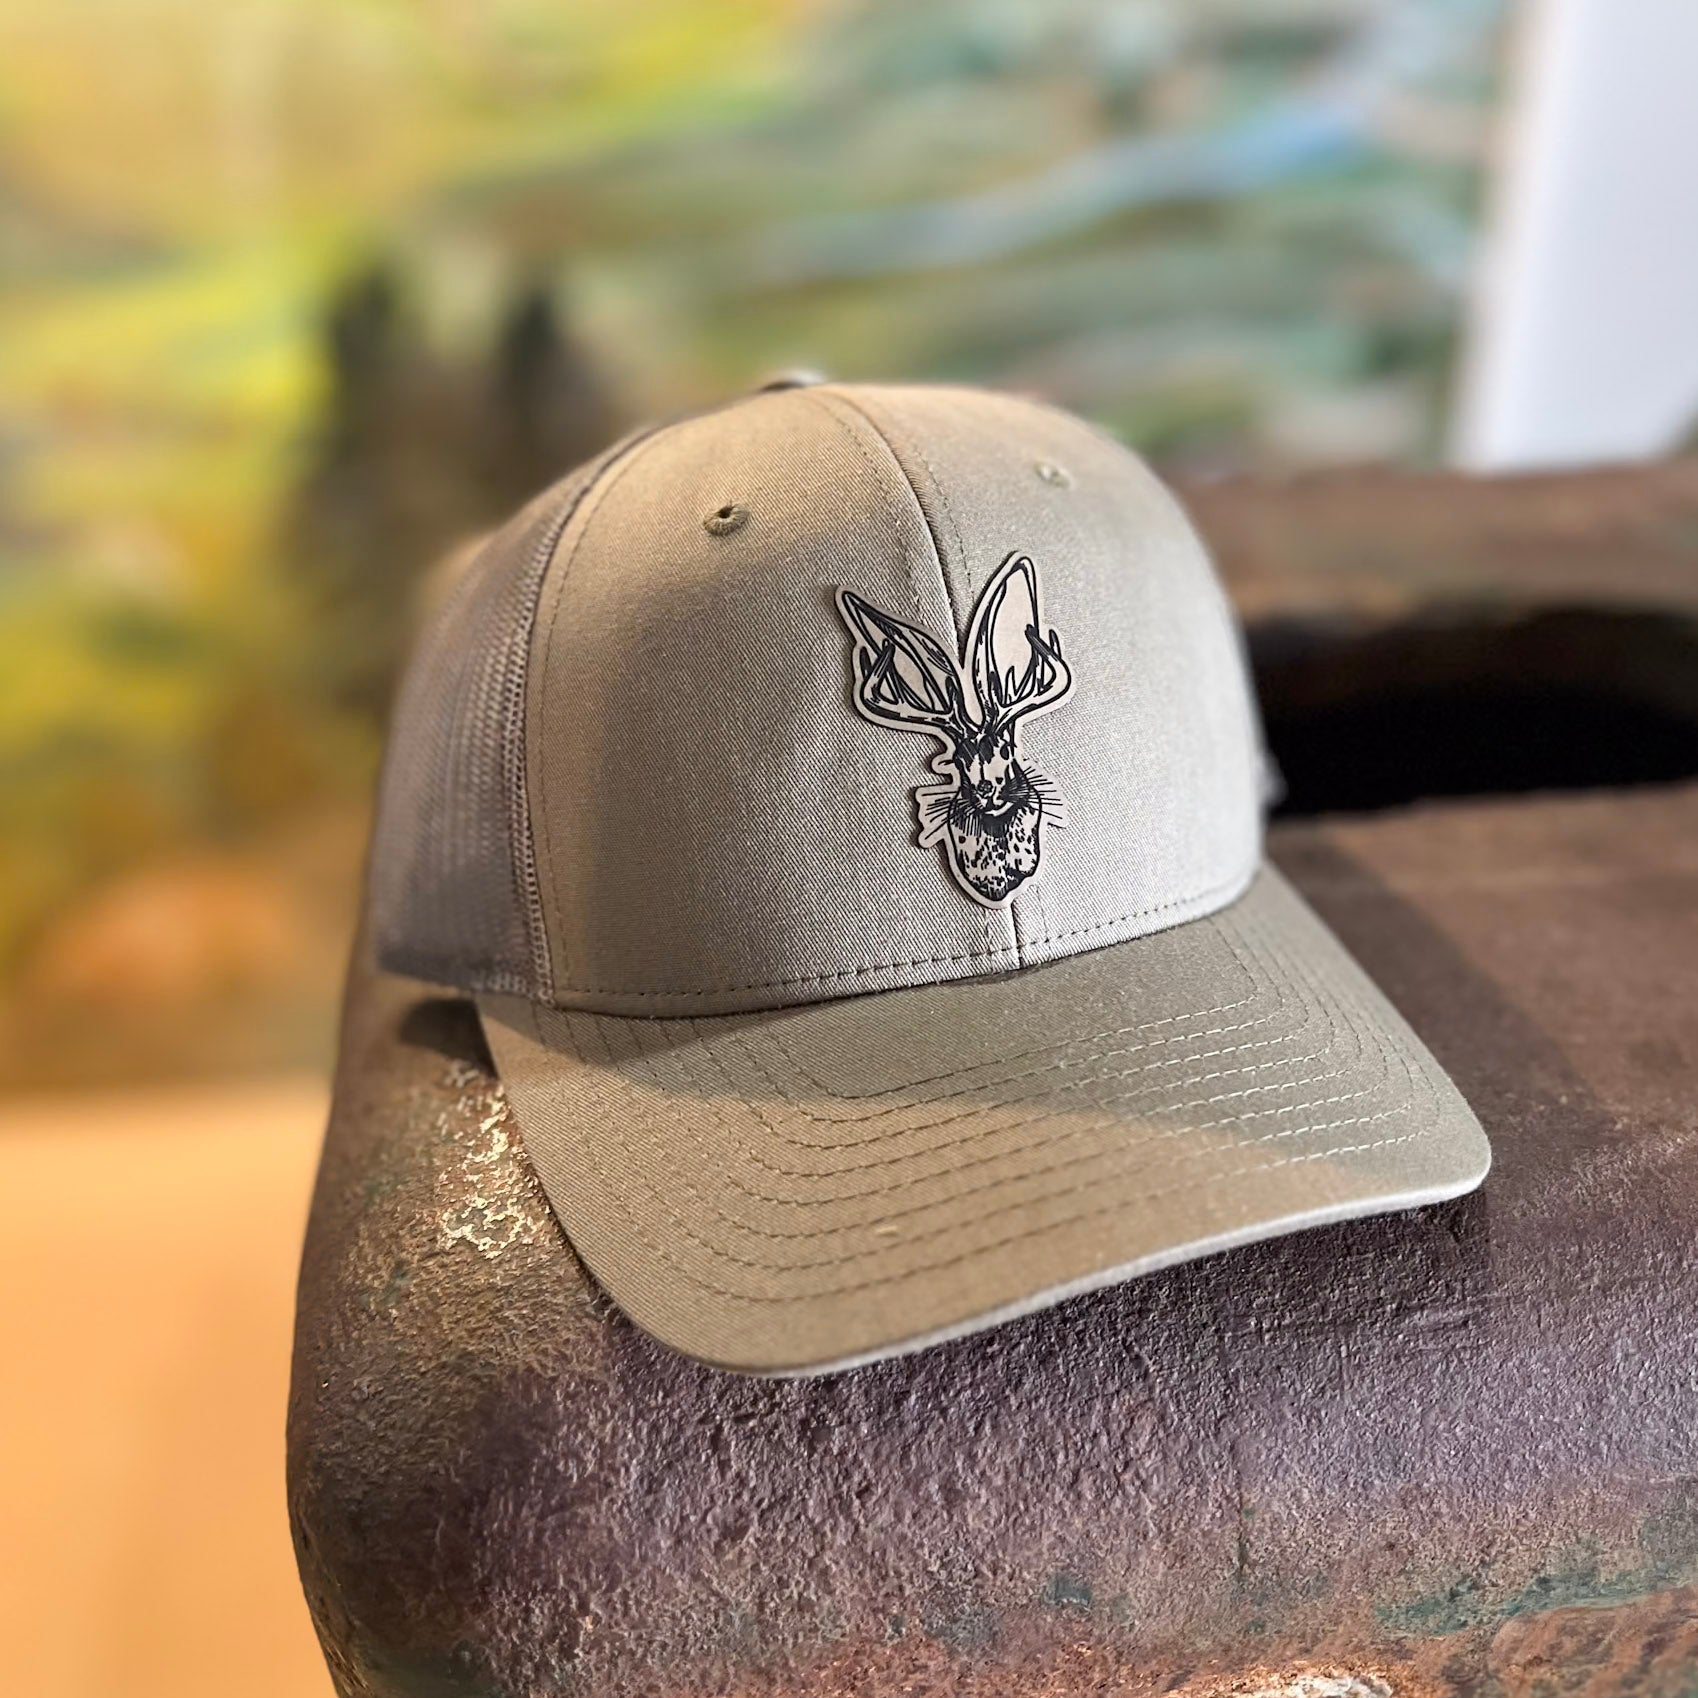 Jackalope hat. Artisan designed. Wyoming trucker hat. Roam Around Wear is a Wyoming t-shirt company based in Gillette, Wyoming